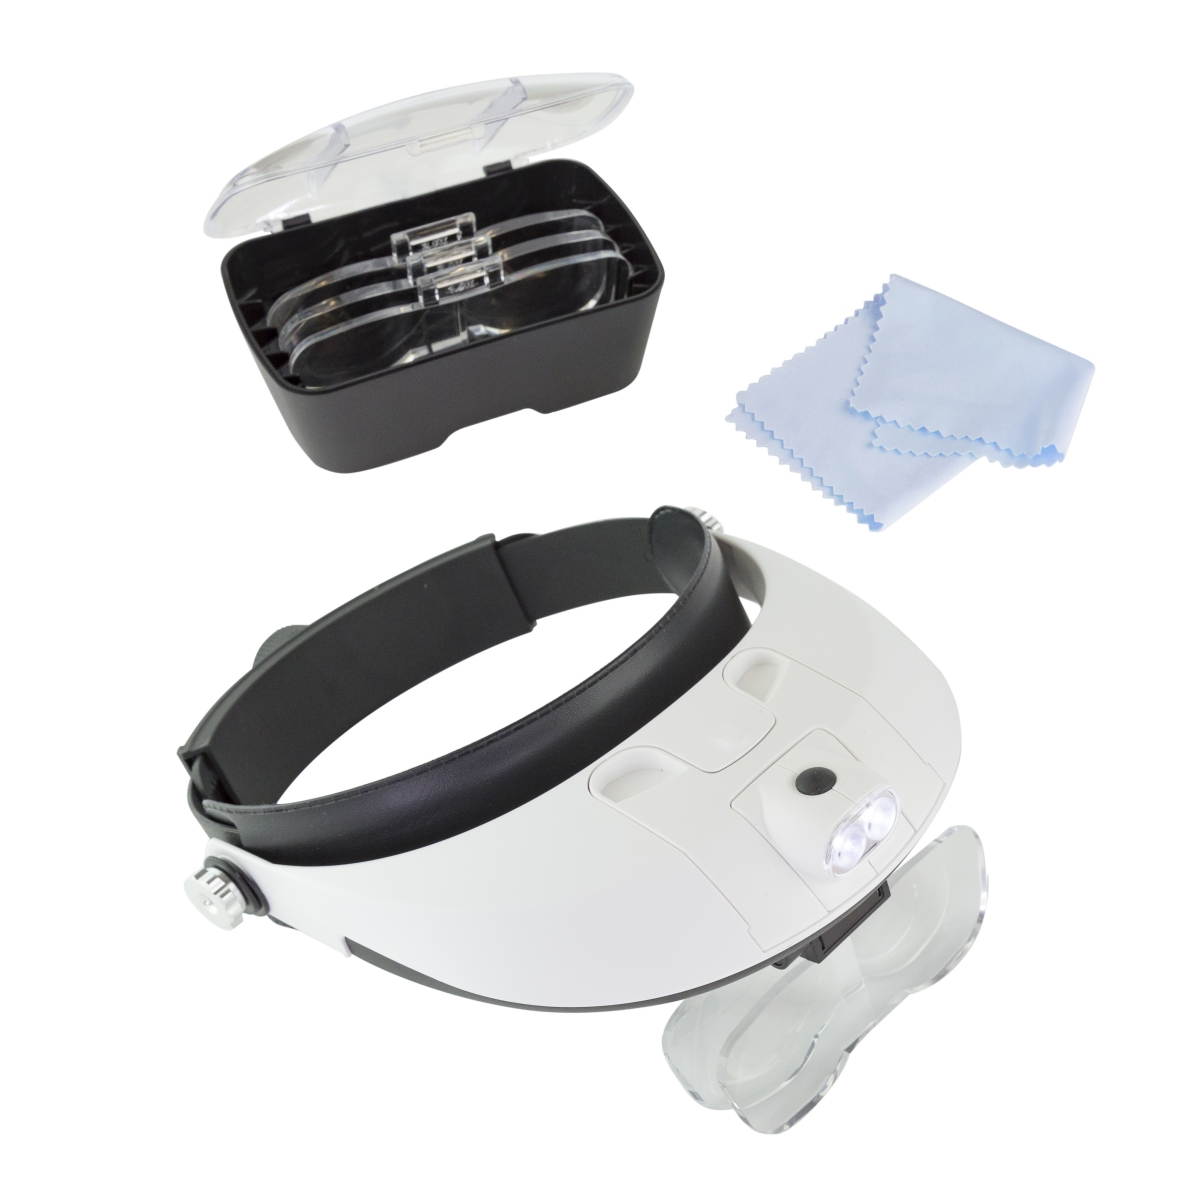 Guideline Publications S P E C I A L   O F F E R - Lightcraft Pro LED Headband Magnifier Kit  New and current subscribers 